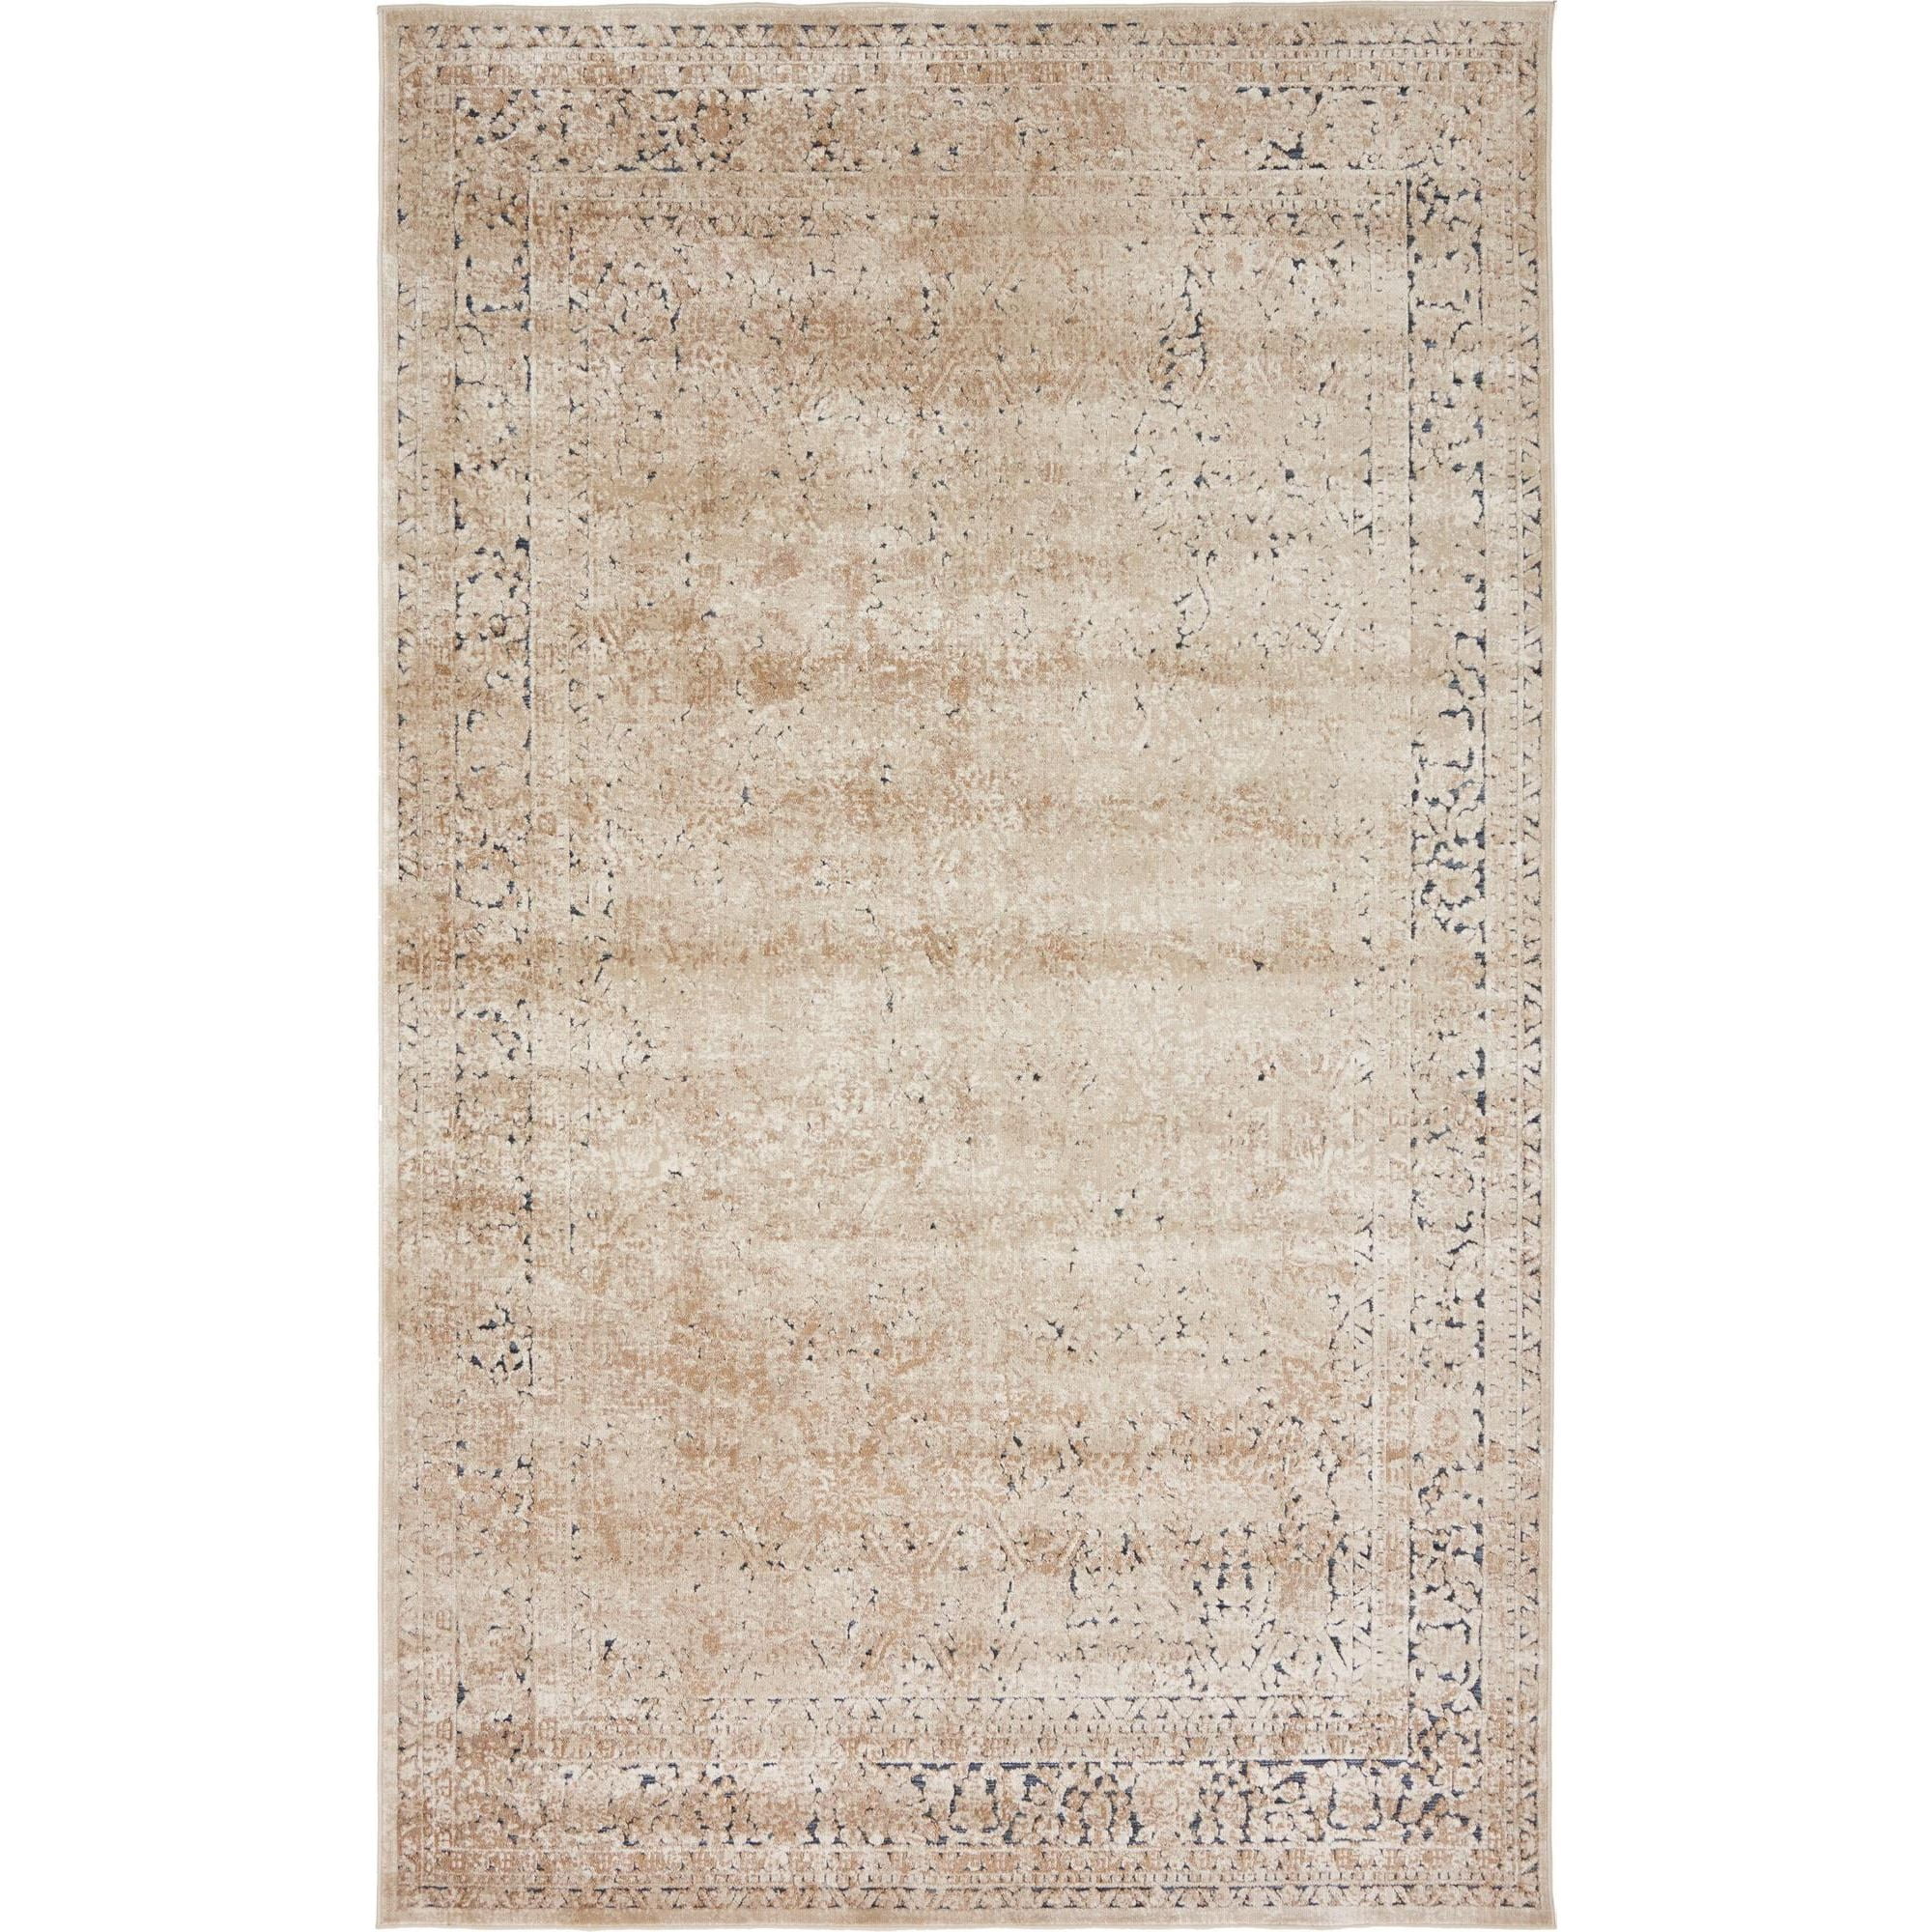 Unique Loom Modern Collection Distressed Indoor and Outdoor Area Rug Vintage Beige/Light Brown Abstract 8 x 10 ft High-Low Pile